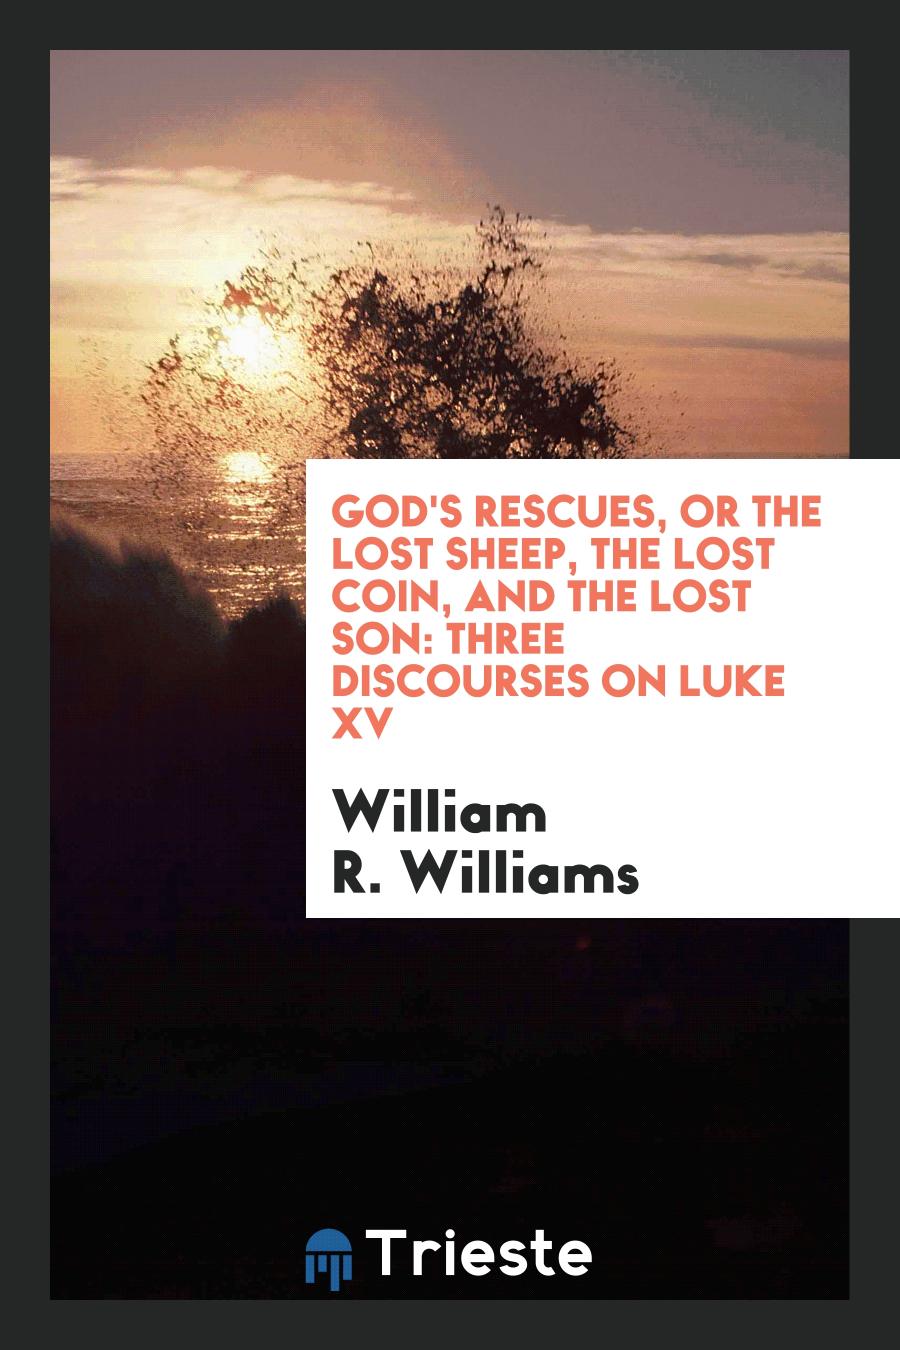 God's Rescues, or the Lost Sheep, the Lost Coin, and the Lost Son: Three Discourses on Luke XV